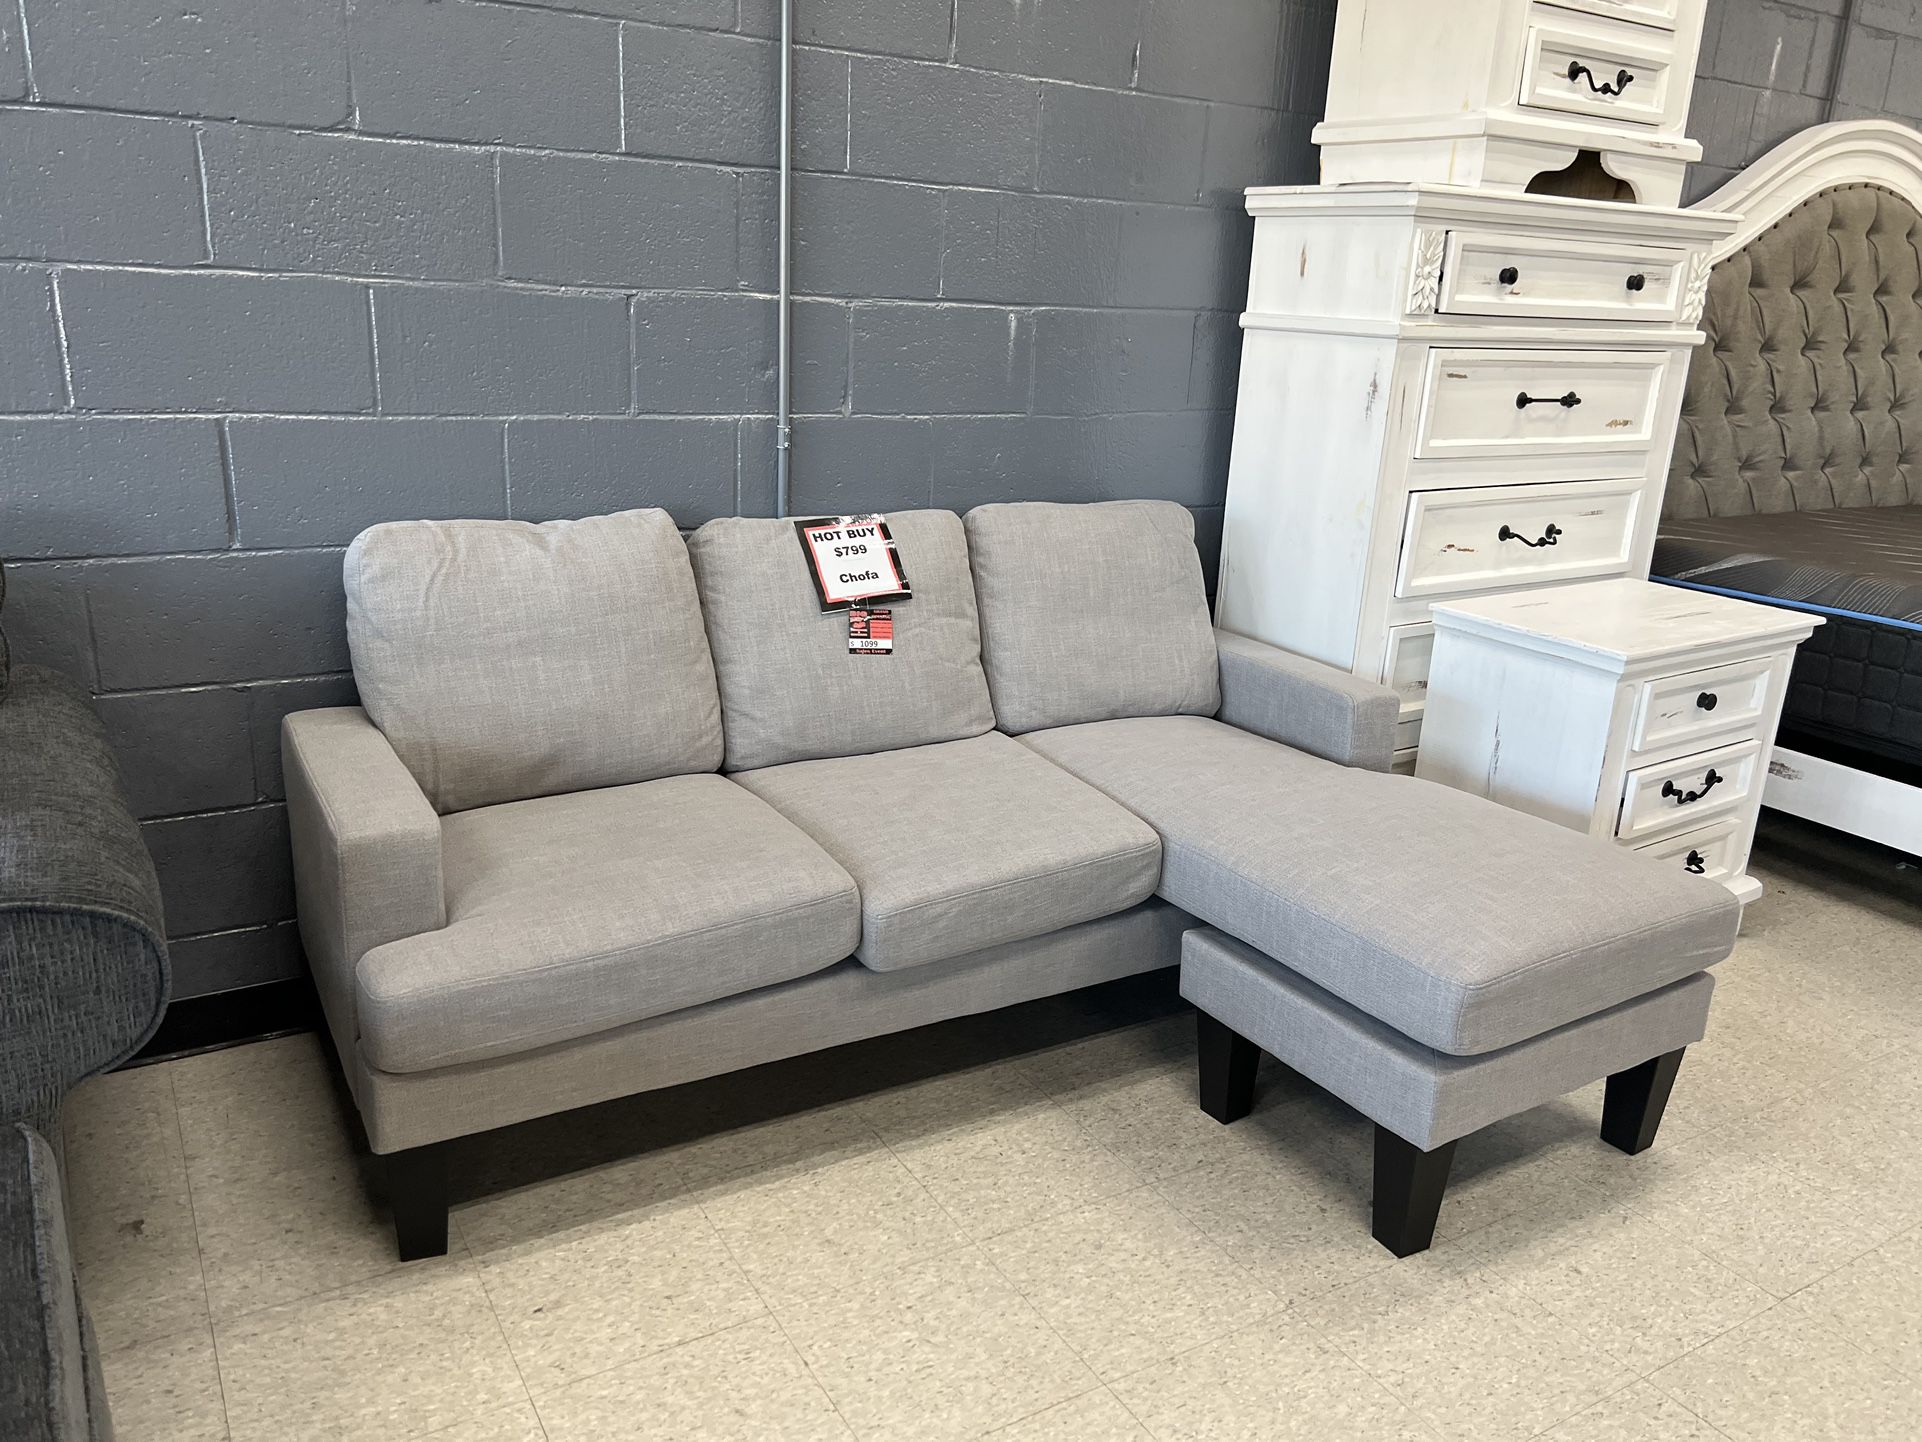 ‼️MANAGER SPECIAL‼️ New Studio Sectional $499.00!!